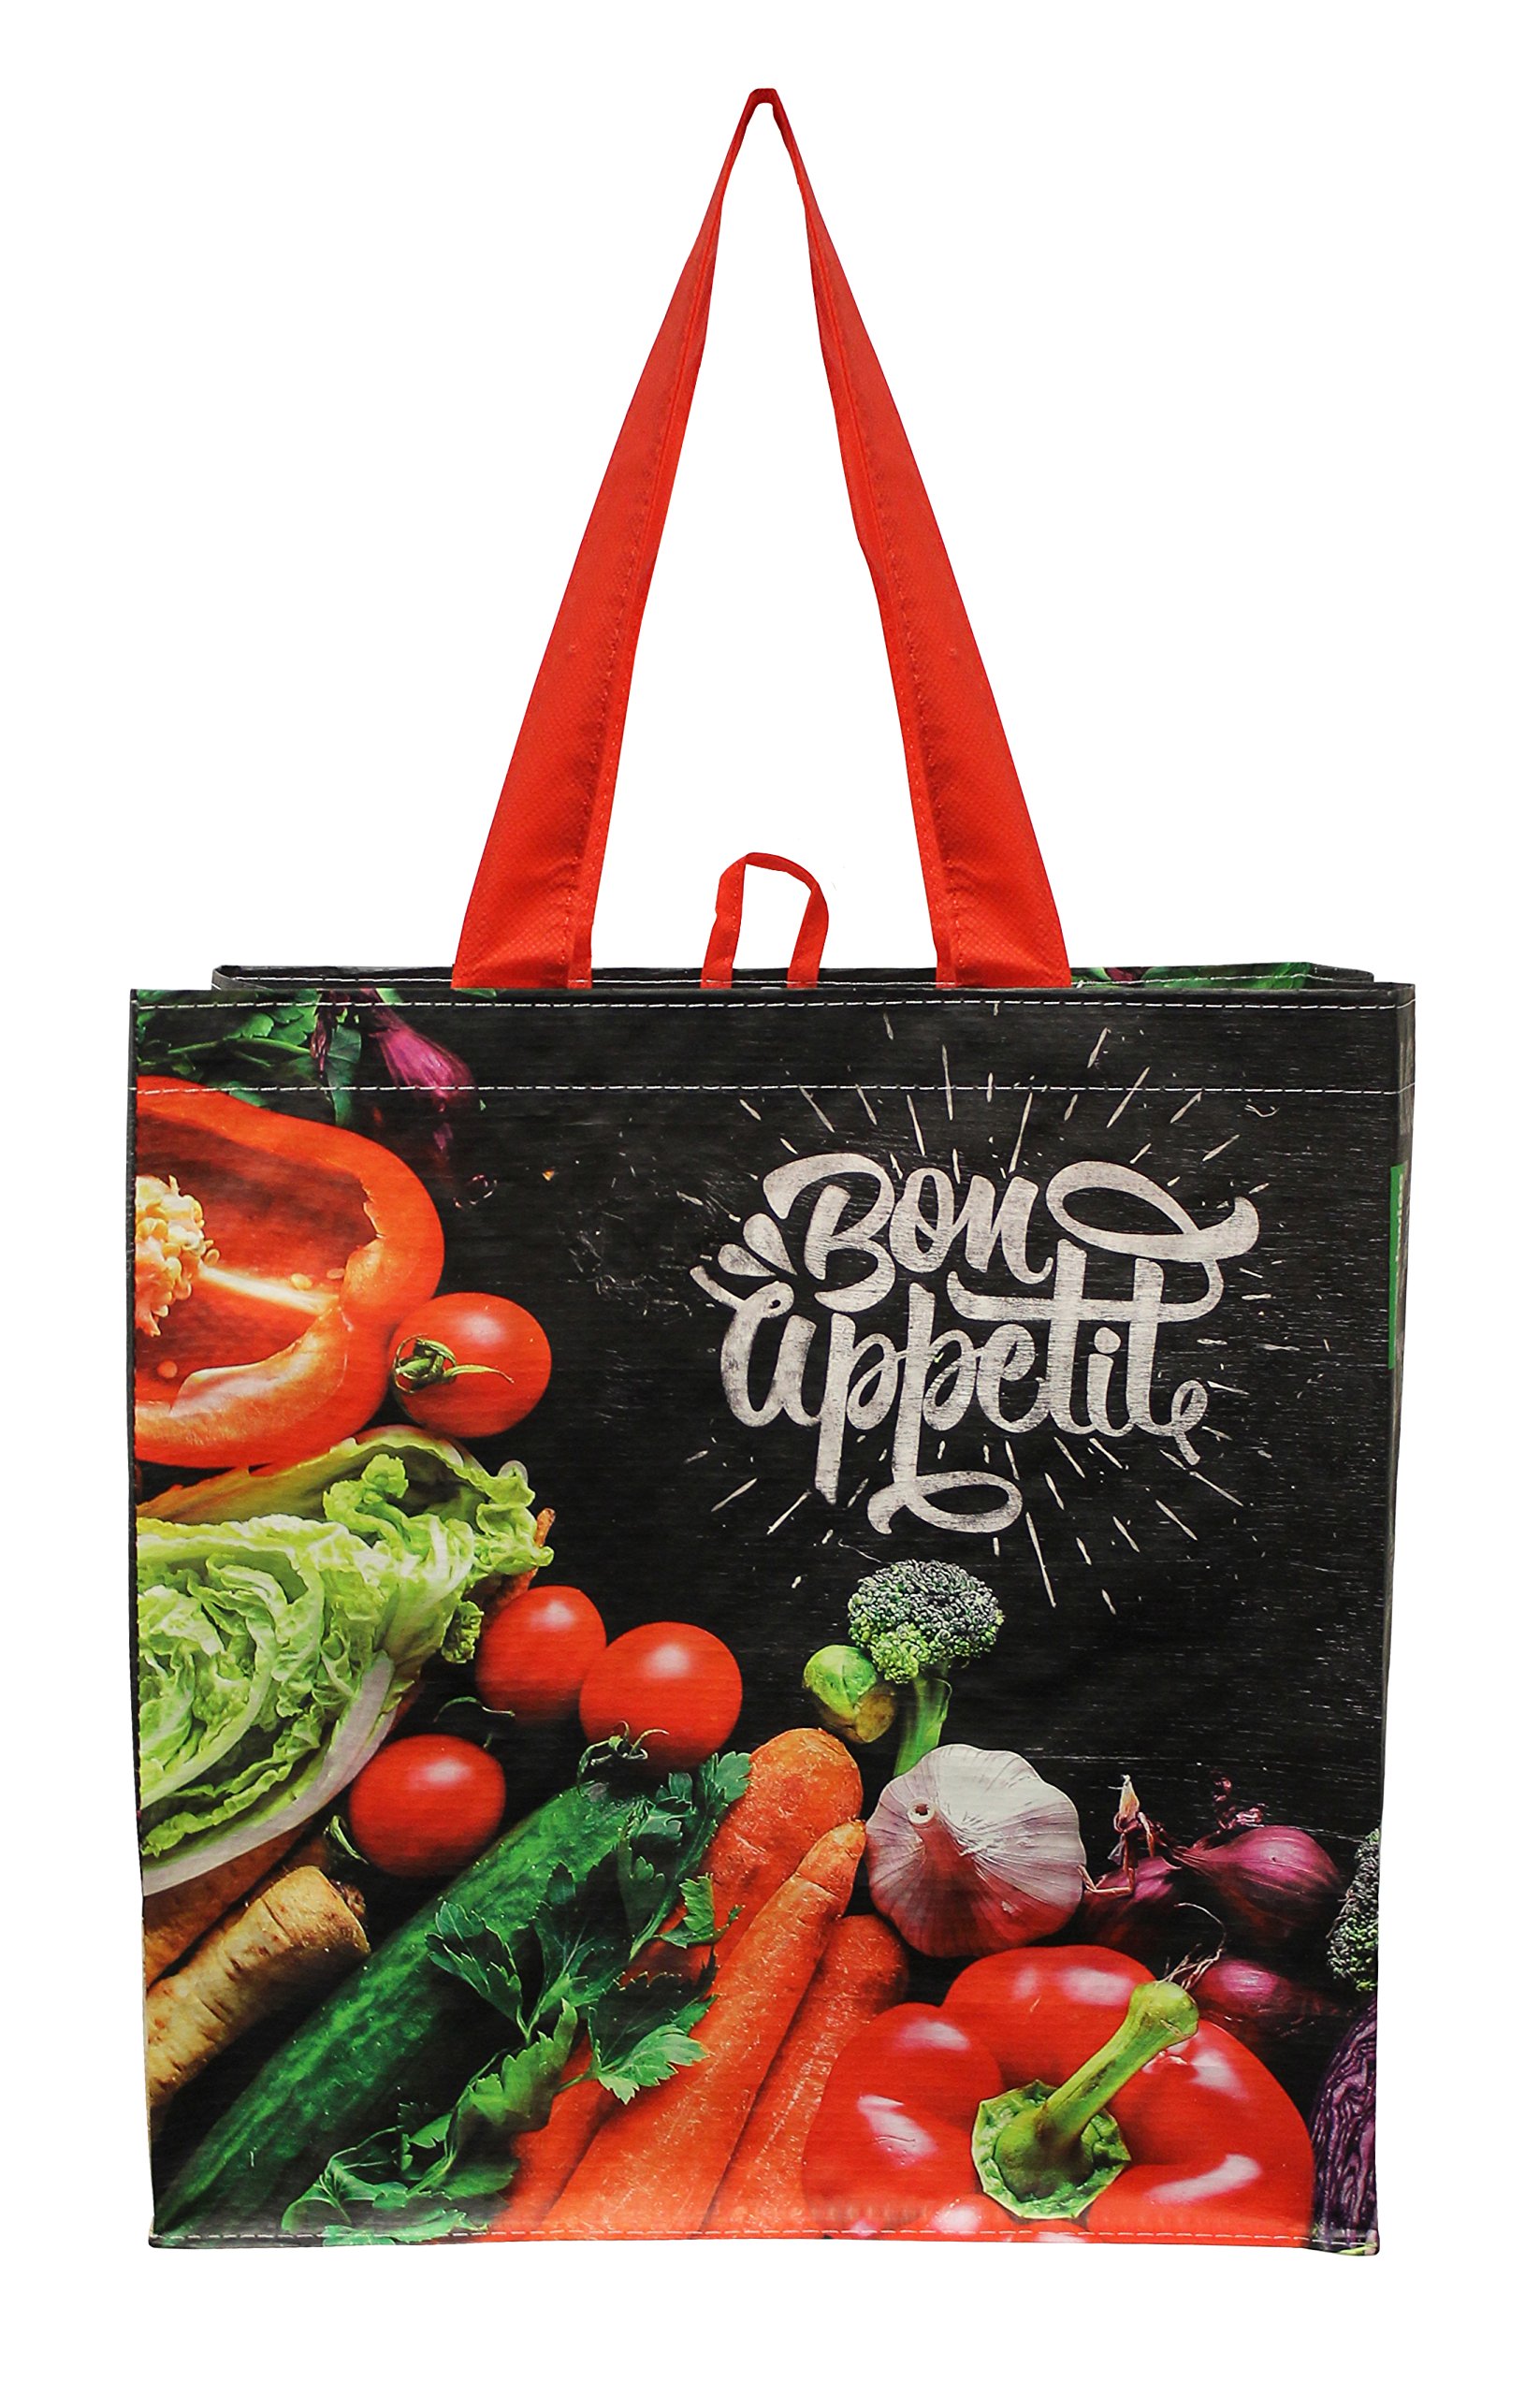 Earthwise Reusable Grocery Shopping Bags Extremely Durable Multi Use Large Stylish Fun Foldable Water-Resistant Totes Design - Chalkboard Veggies (Pack of 5)